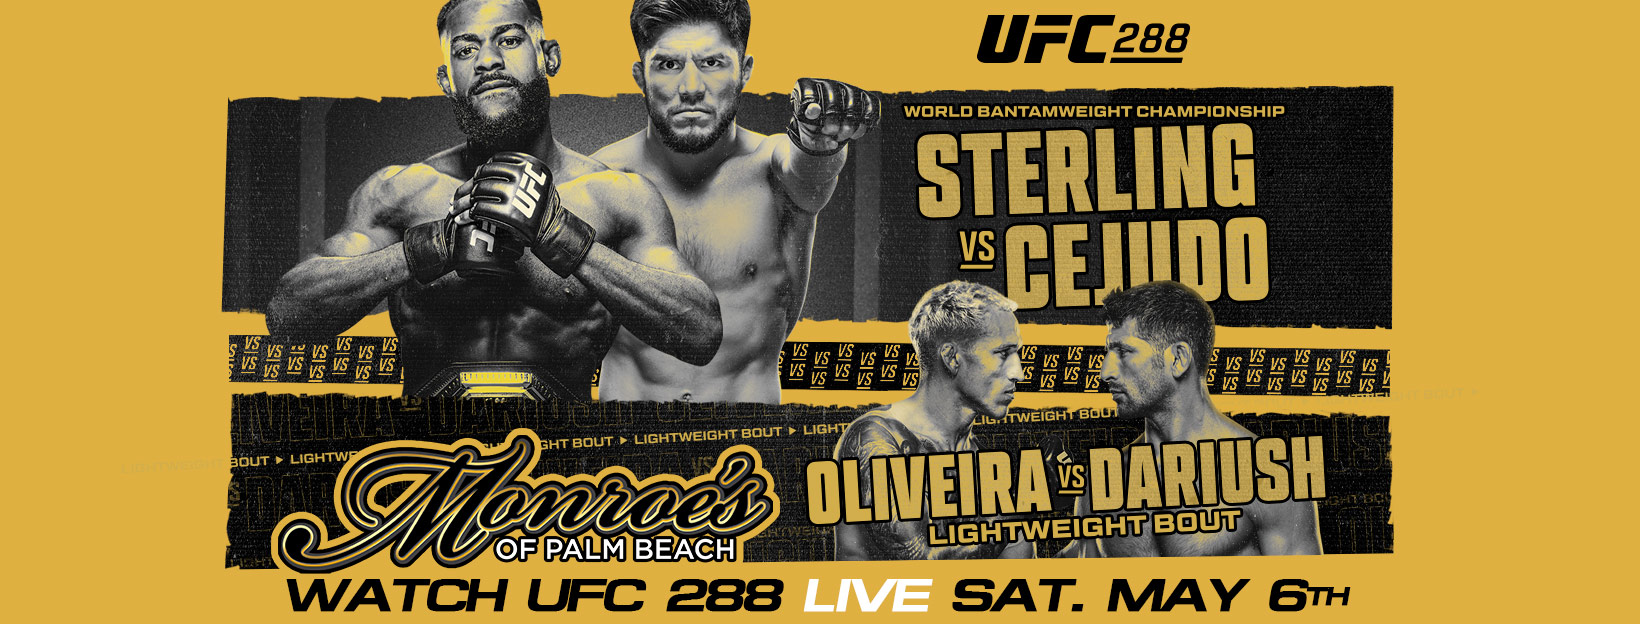 UFC 288 Live watch Party Monroes West Palm Beach